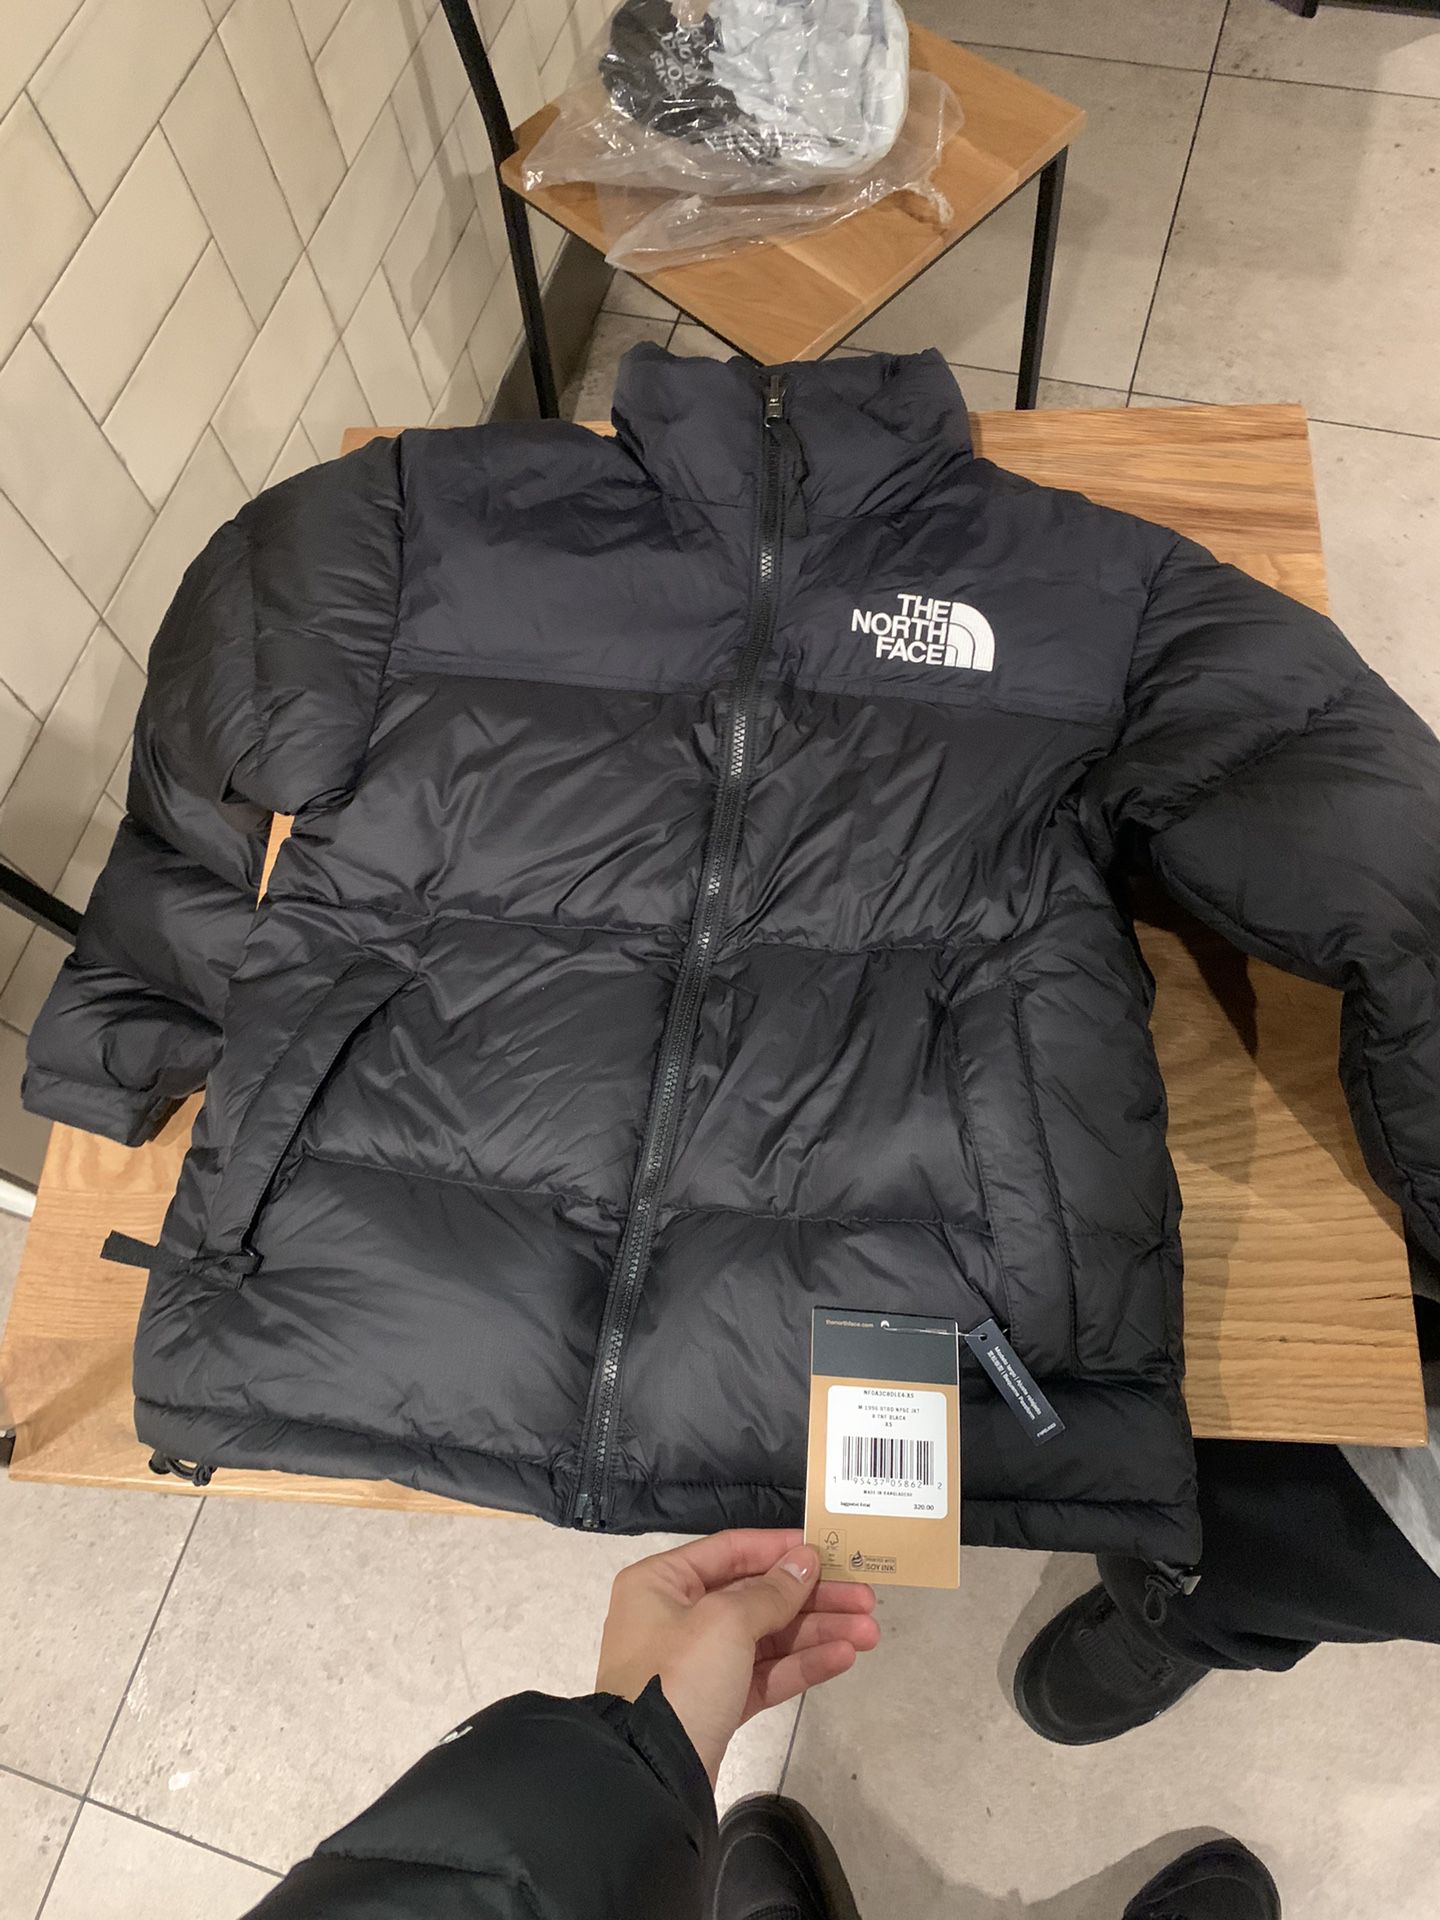 North Face jacket 700 for Sale in Queens, NY - OfferUp